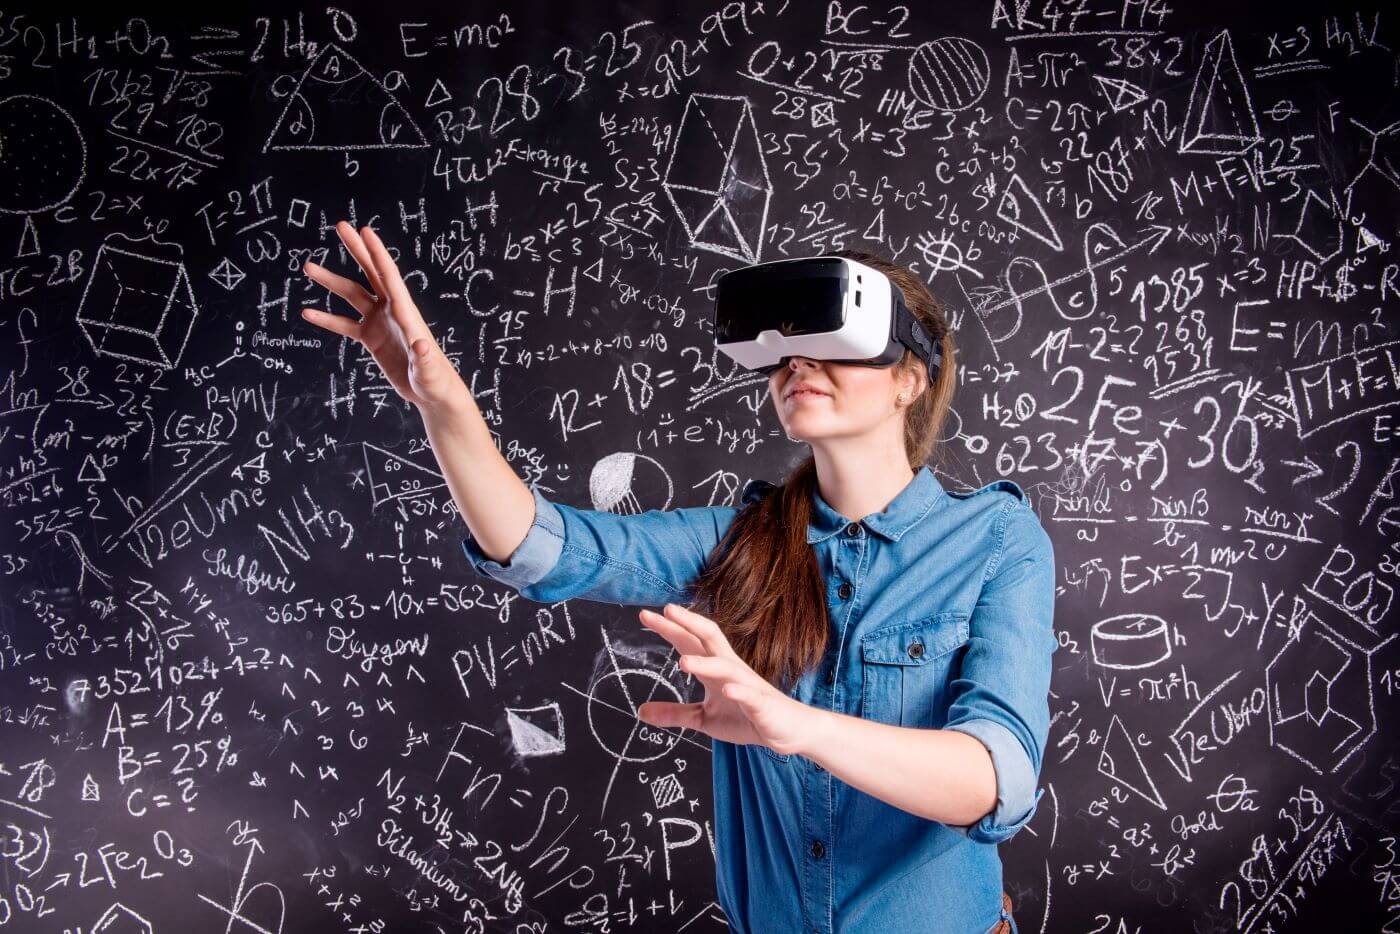 XpertVR Free Webinars on Using VR in Education